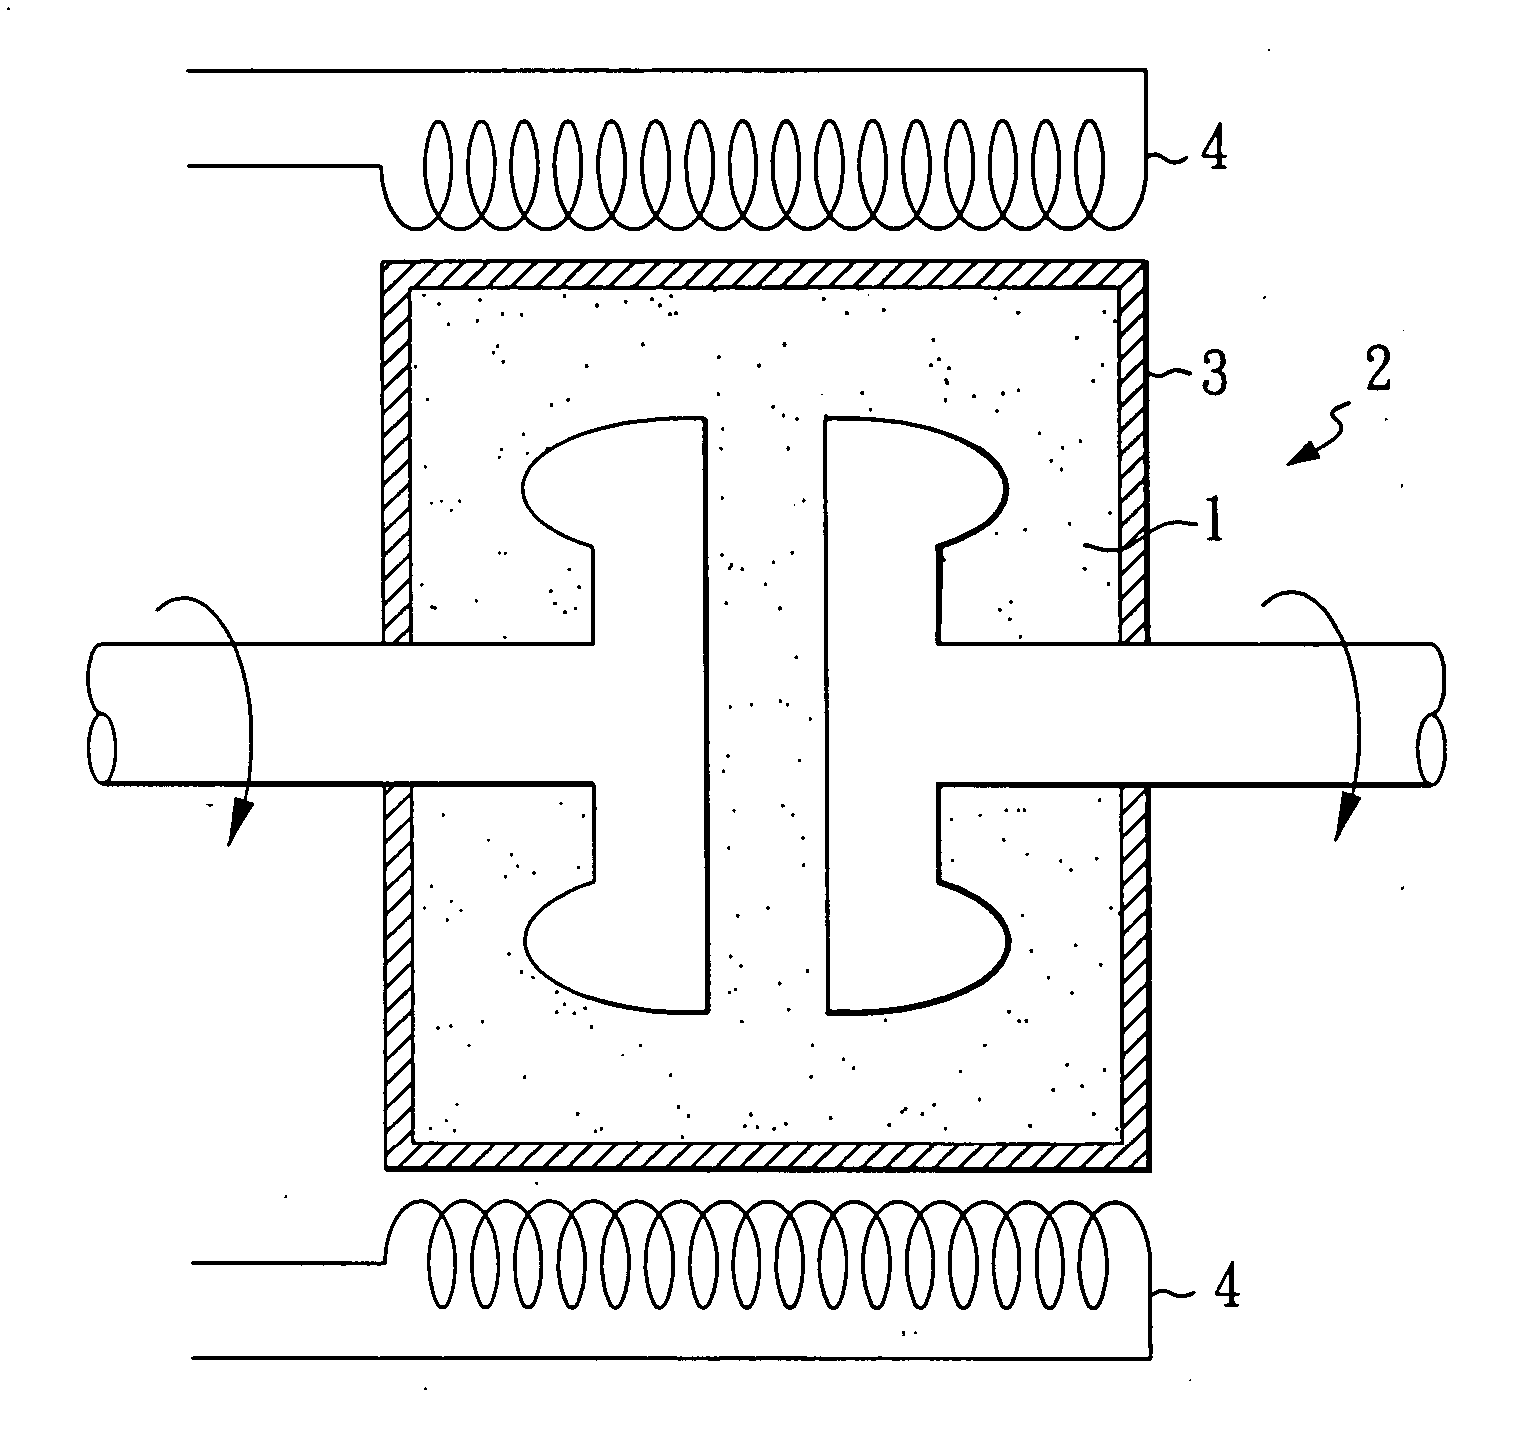 Magnetic drive transmission device having heat dissipation, magnetic permeability and self-lubrication functions